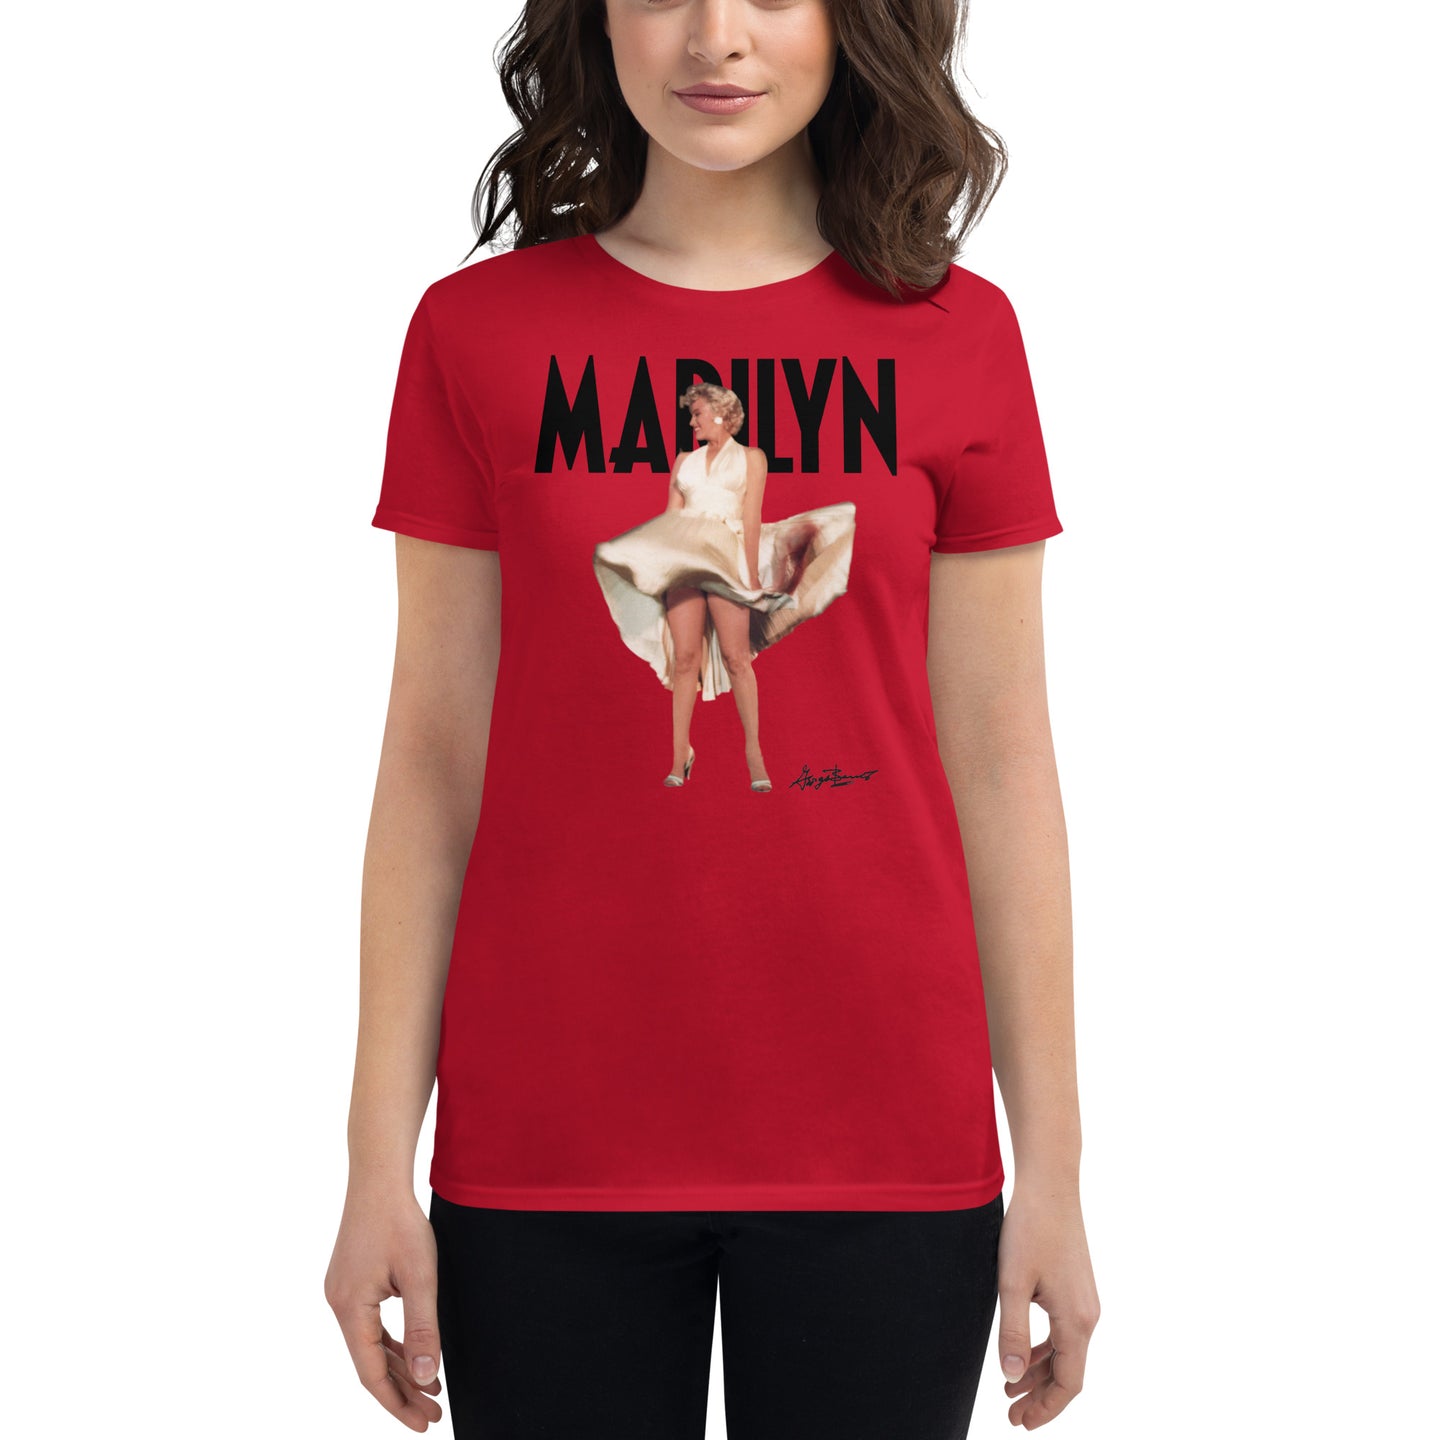 Marilyn The Seven Year Itch Women's short sleeve t-shirt